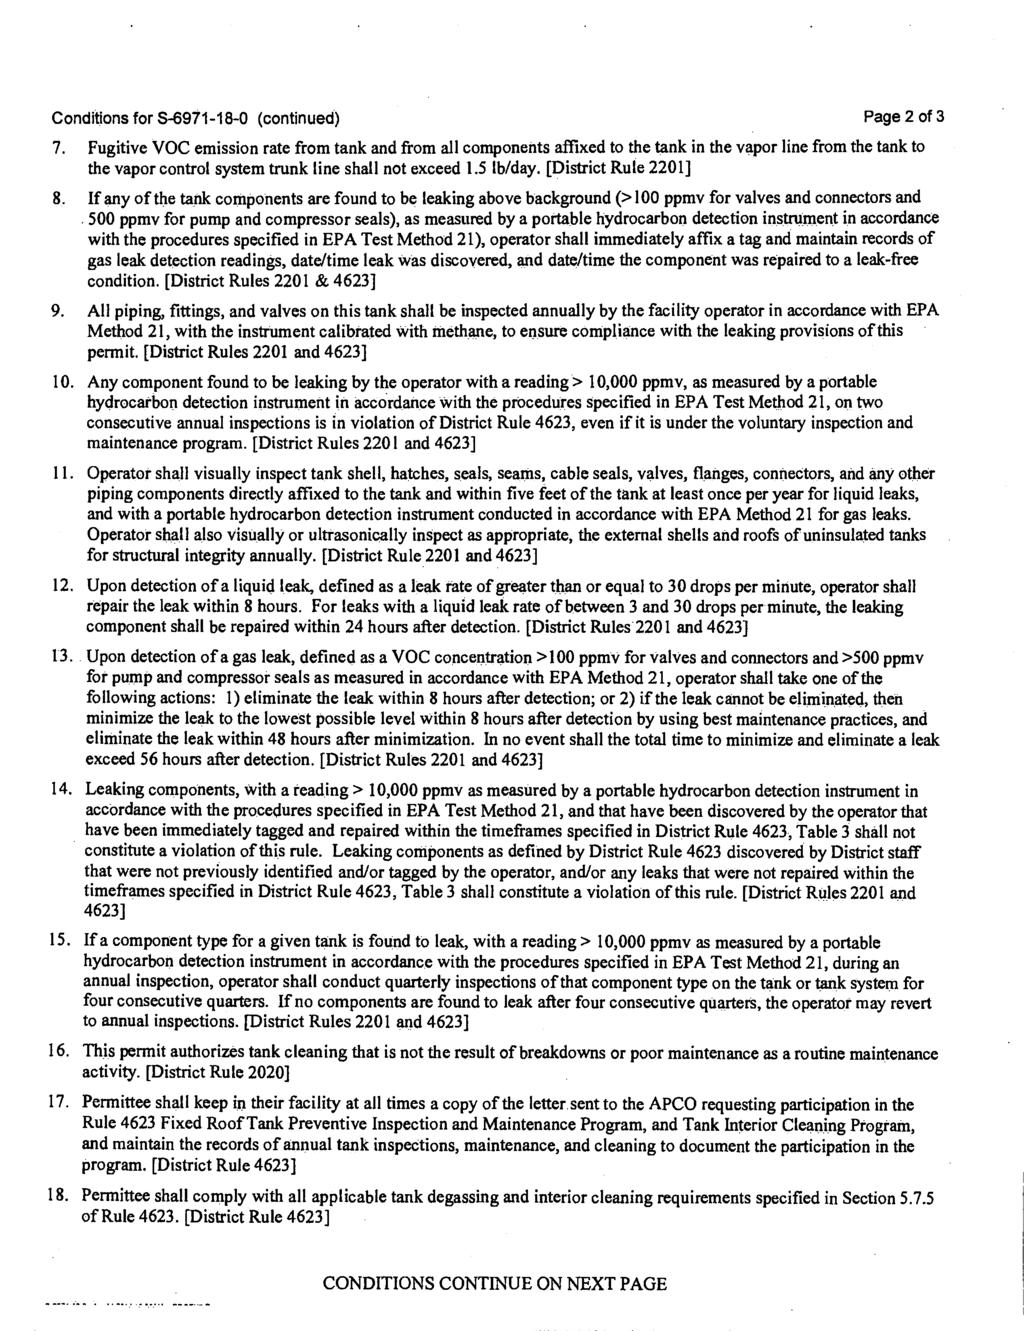 Conditions for S-6971-18-0 (continued) Page 2 of 3 7.